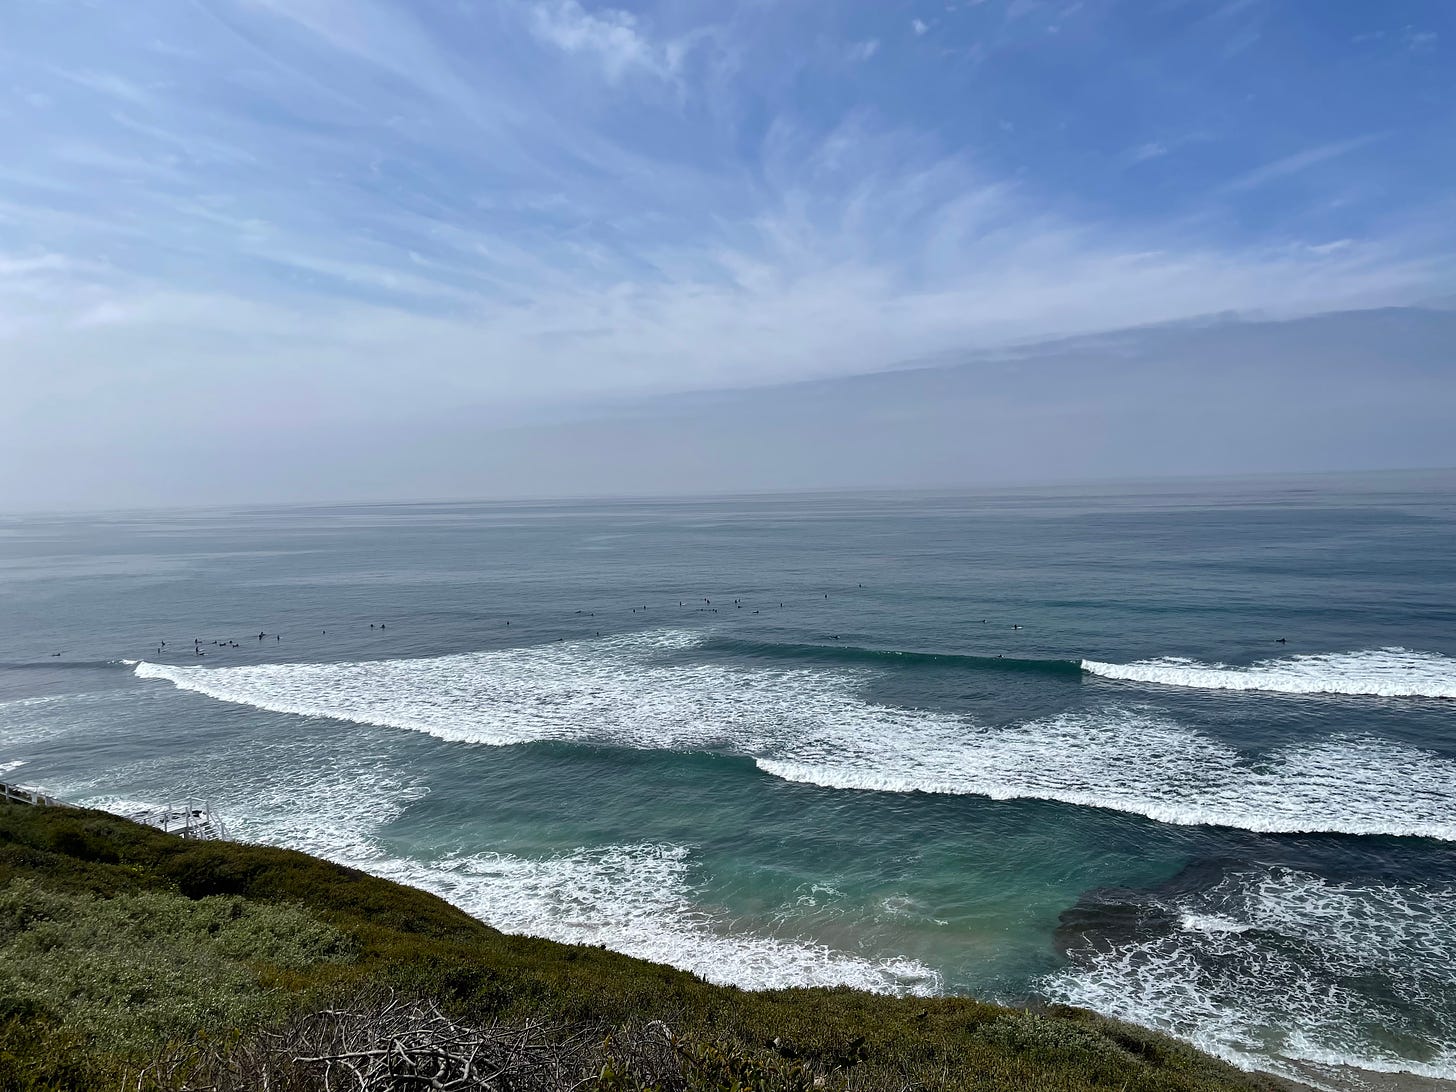 Waves of the Pacific Ocean, seen from atop a cliff. The sky is clear, with thin clouds spread across it.